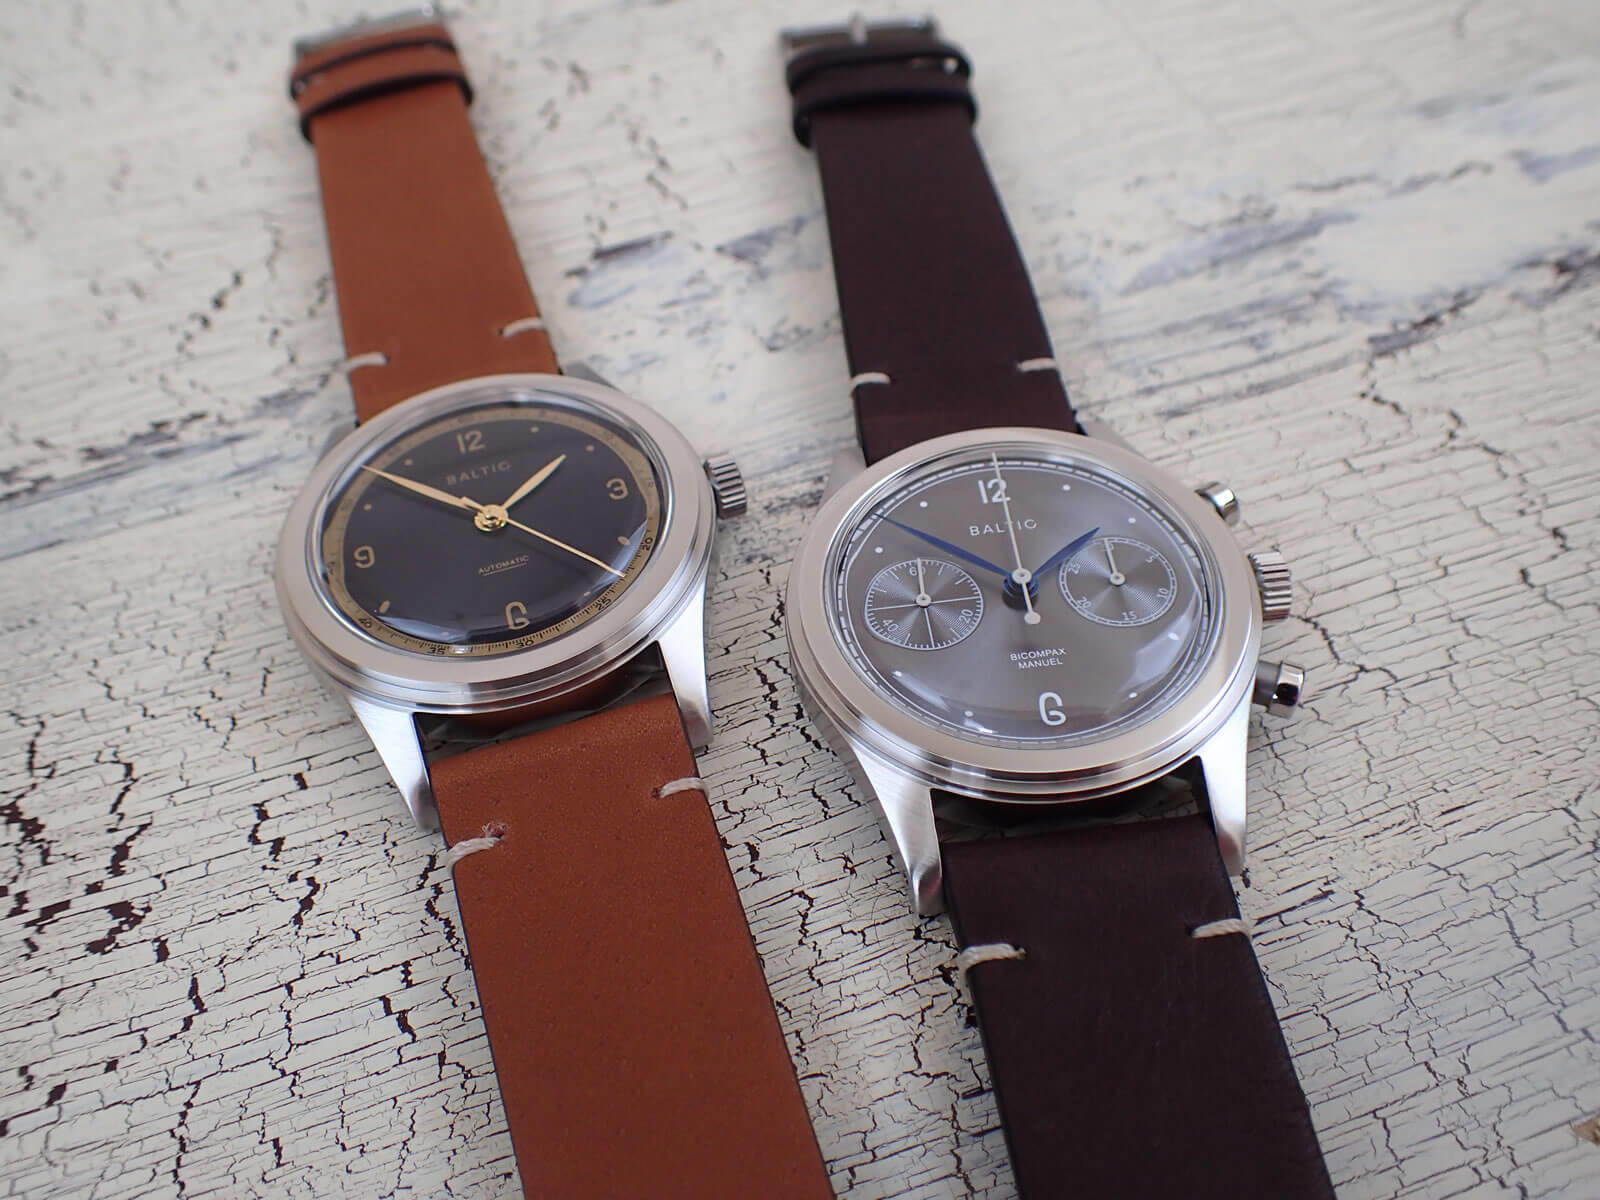 Baltic Watches「HMS 001 - Blue & Gold」&「Bicompax 001 - Slate Grey」